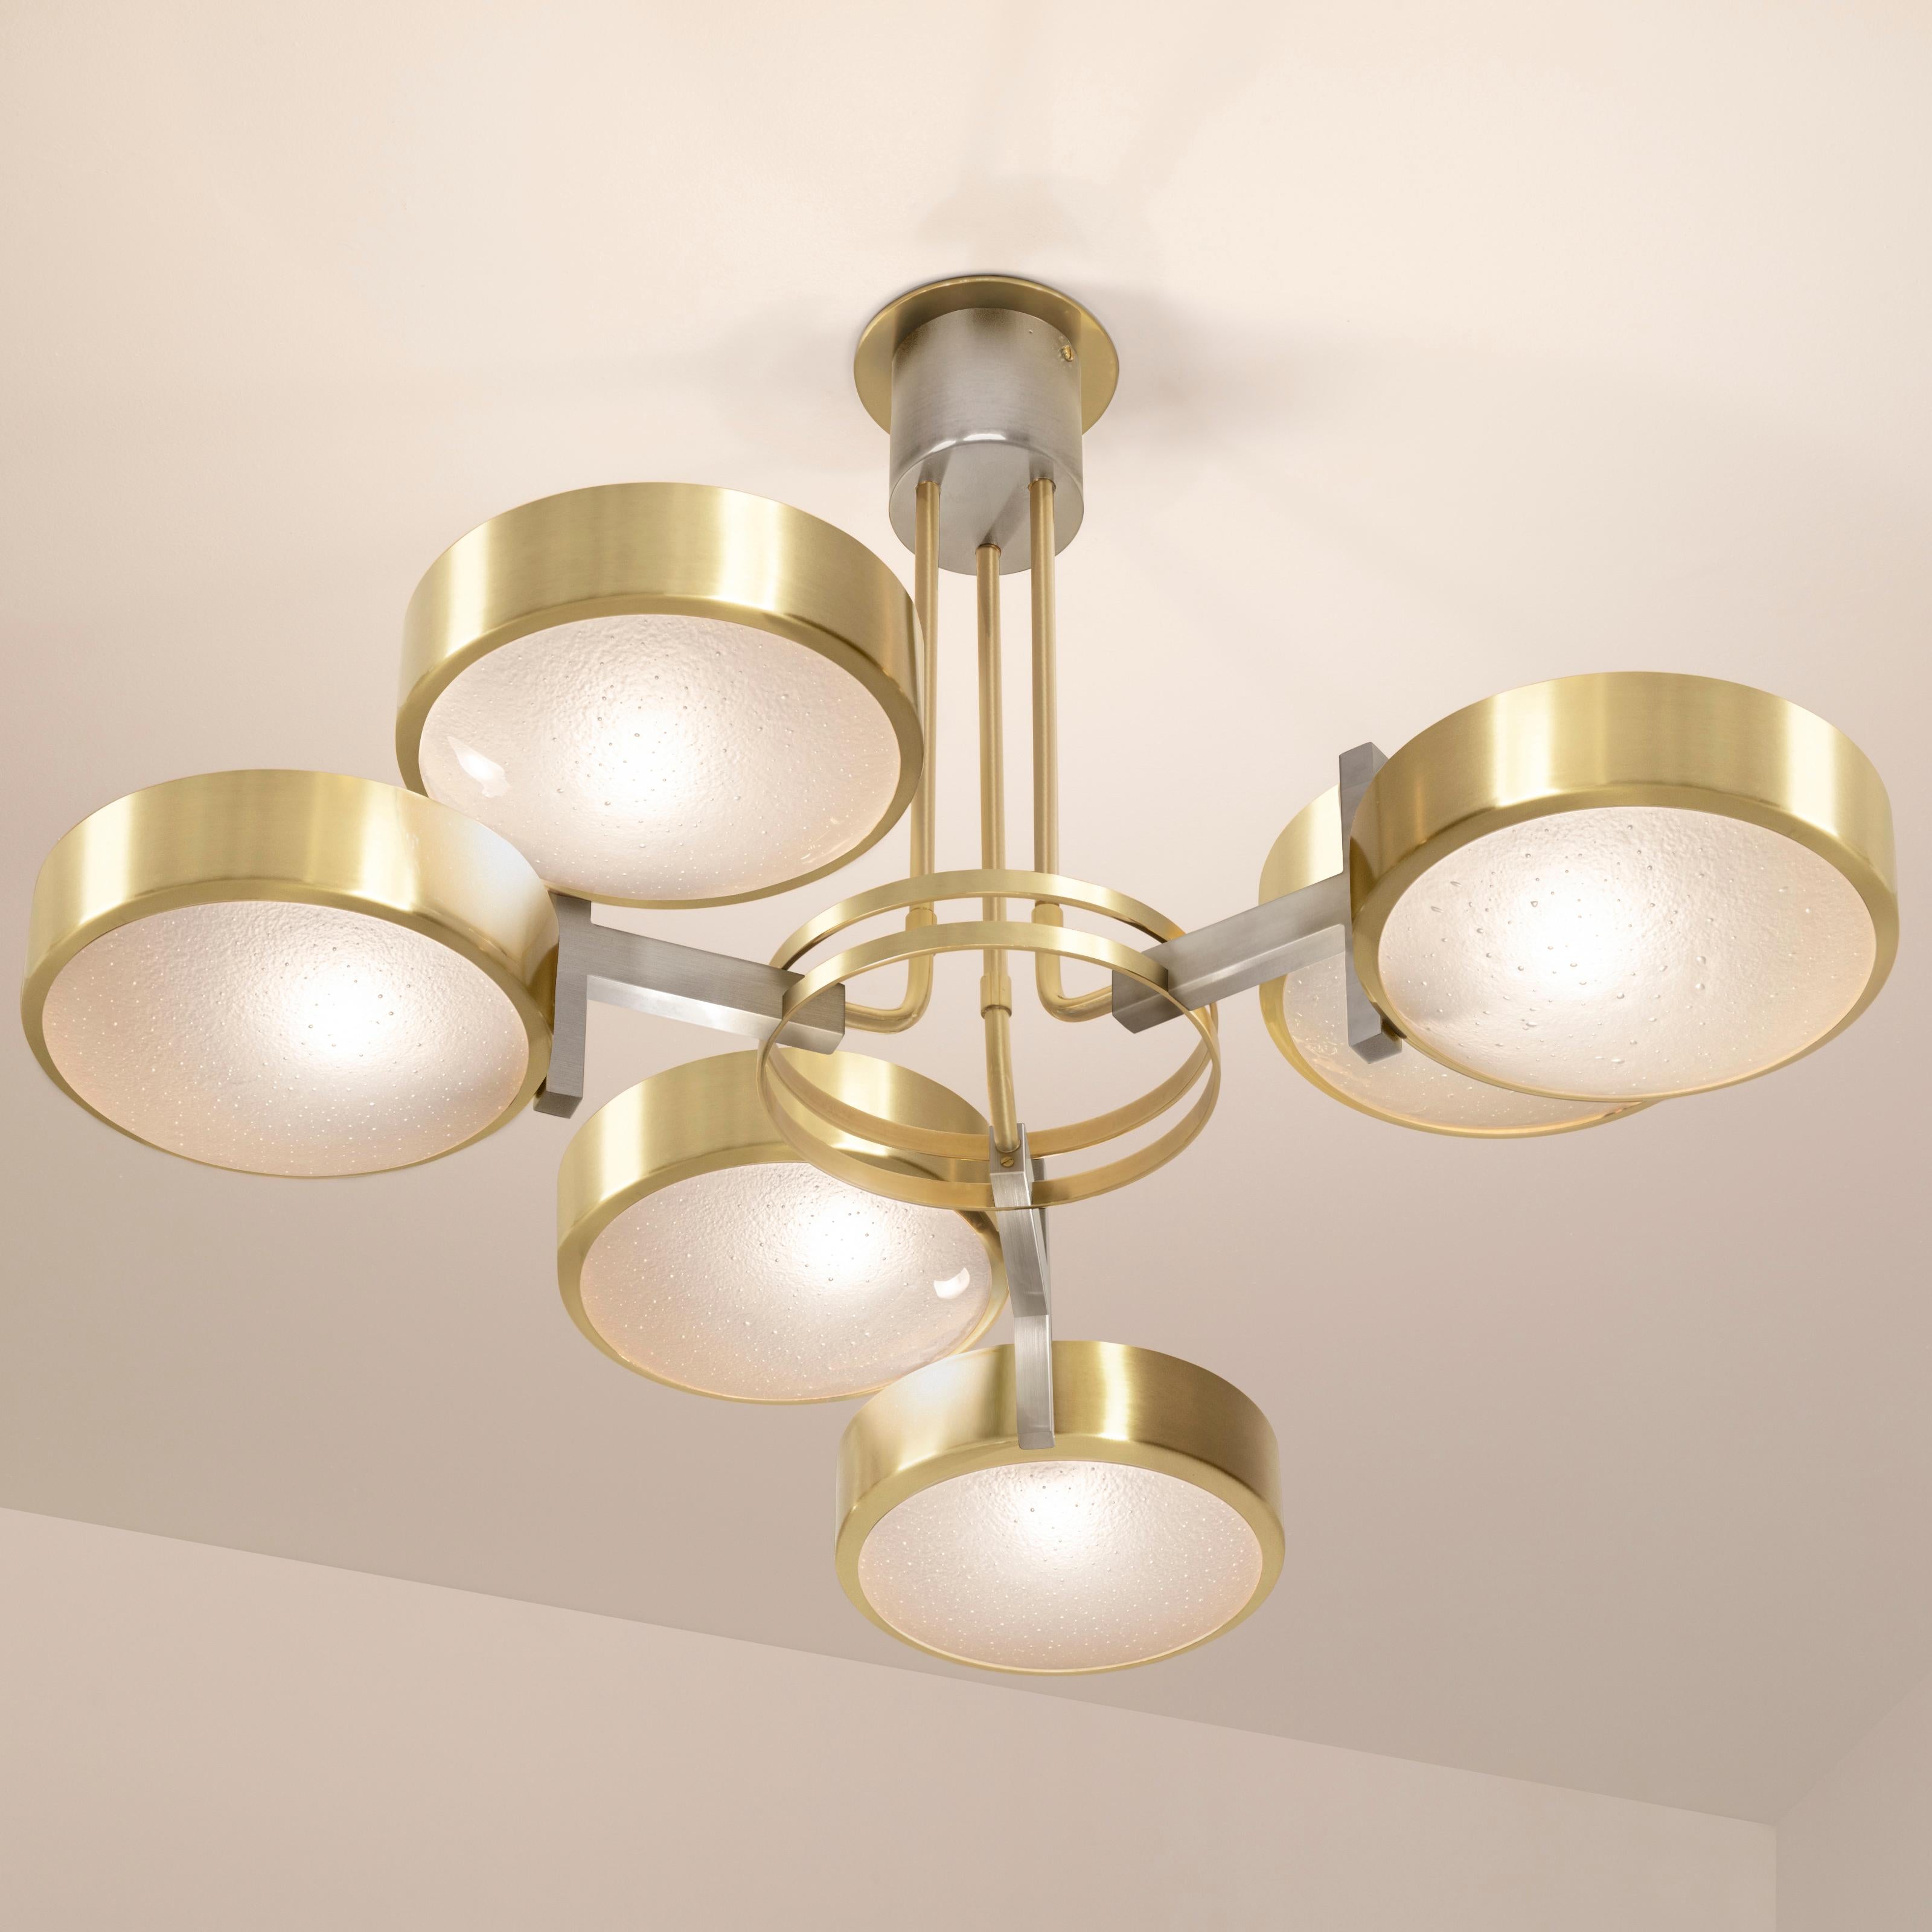 The Eclissi ceiling light is designed around three pairs of eclipsing shades bound by a series of brass rings and a distinctive triple stem. The first images show the fixture in our satin brass finish with satin brass accents-subsequent pictures